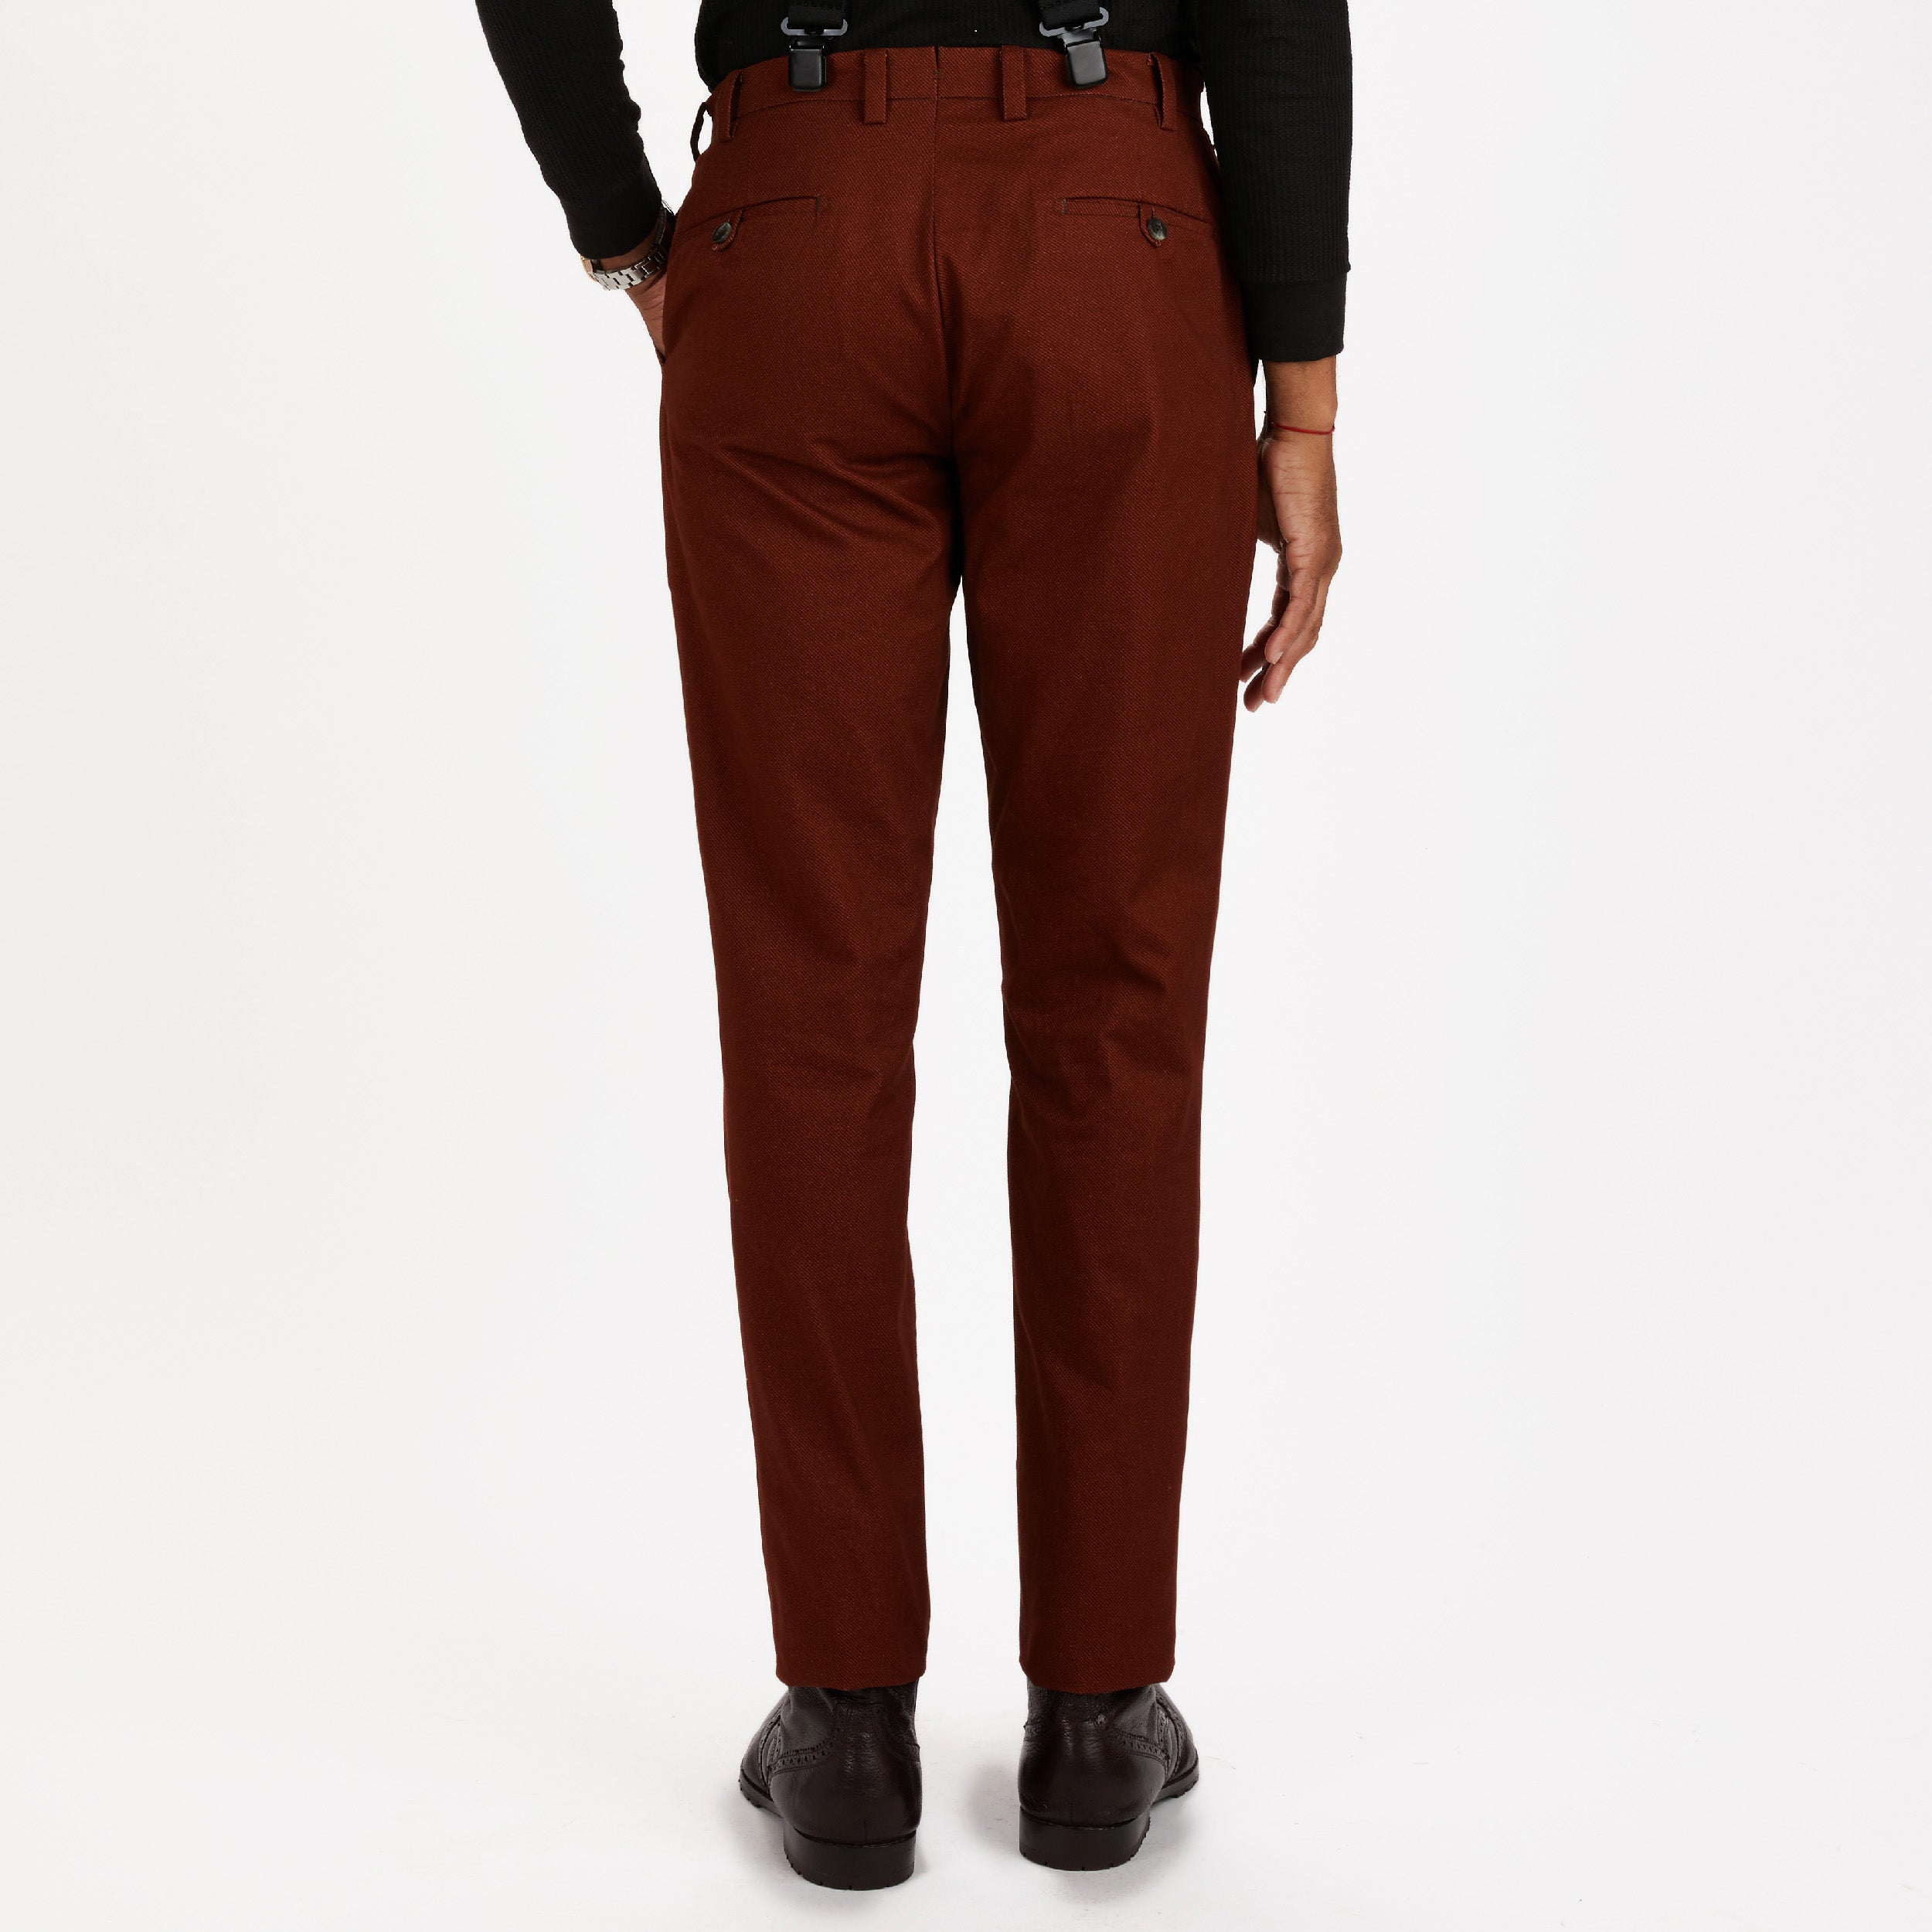 The Leather and Tweed Twill Trouser